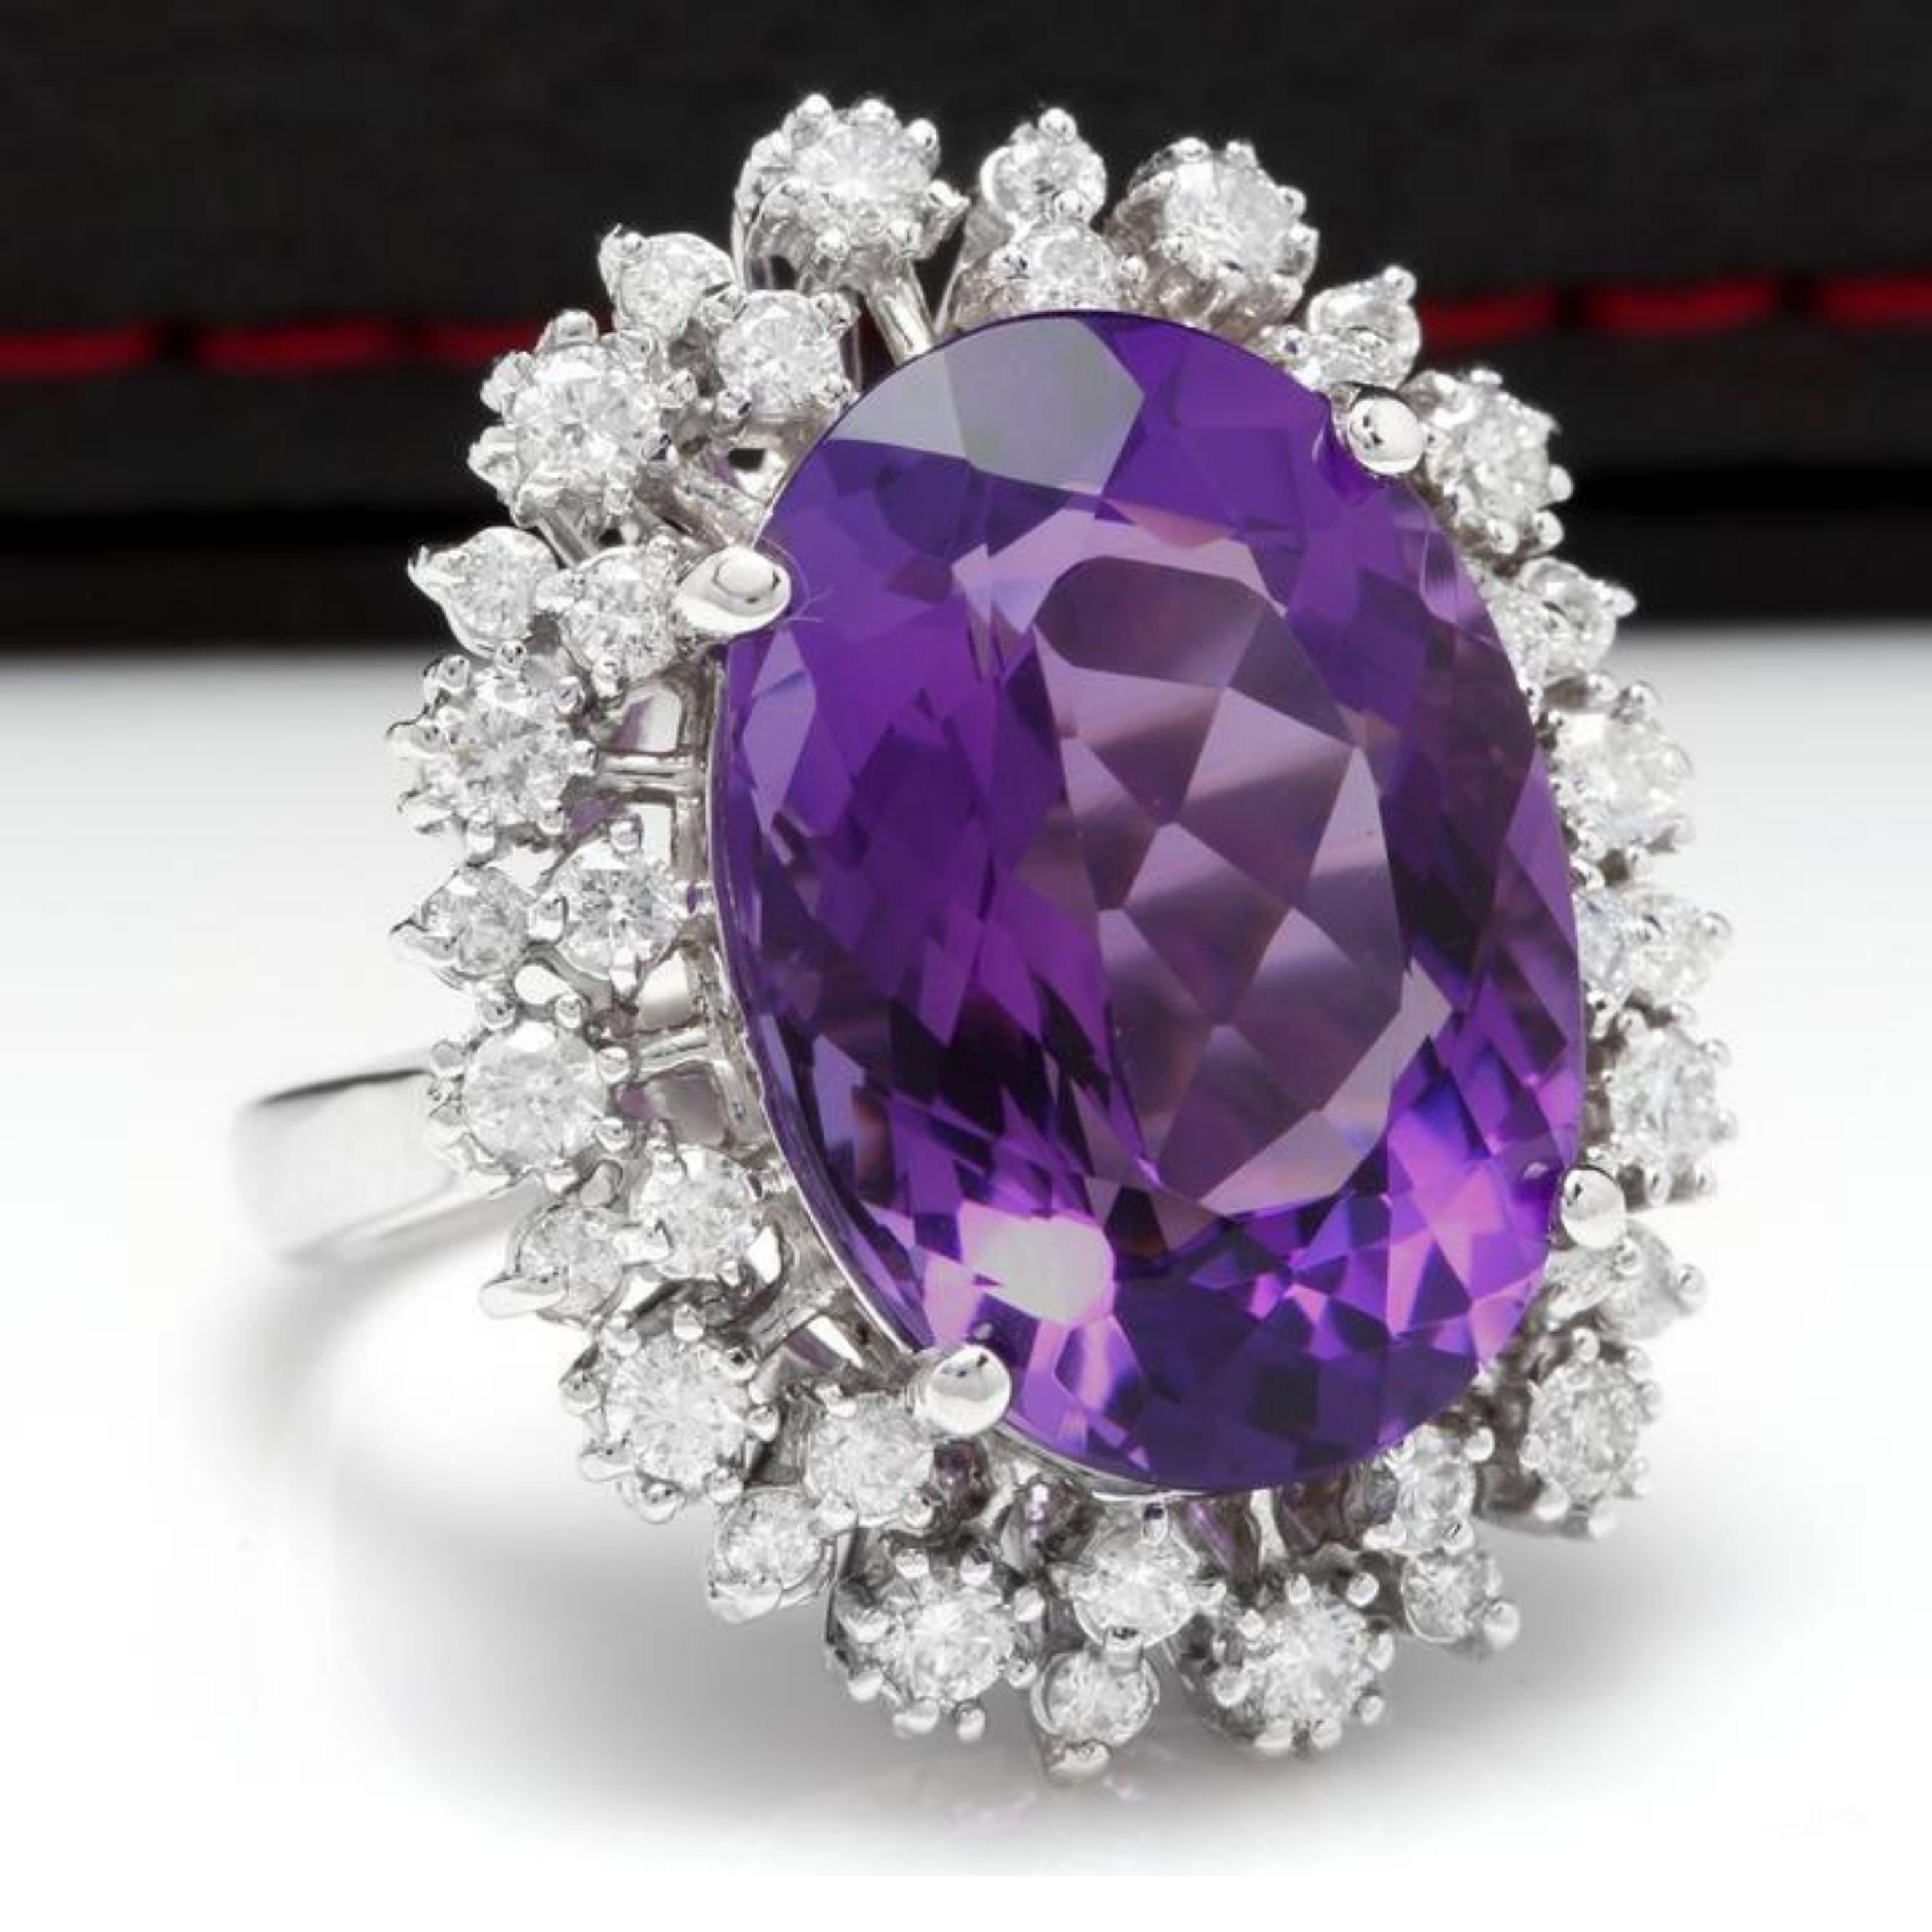 15.30 Carats Natural Amethyst and Diamond 14K Solid White Gold Ring

Total Natural Oval Shaped Amethyst Weights: Approx. 14.00 Carats

Amethyst Measures: Approx. 18 x 14mm

Natural Round Diamonds Weight: Approx. 1.30 Carats (color G-H / Clarity